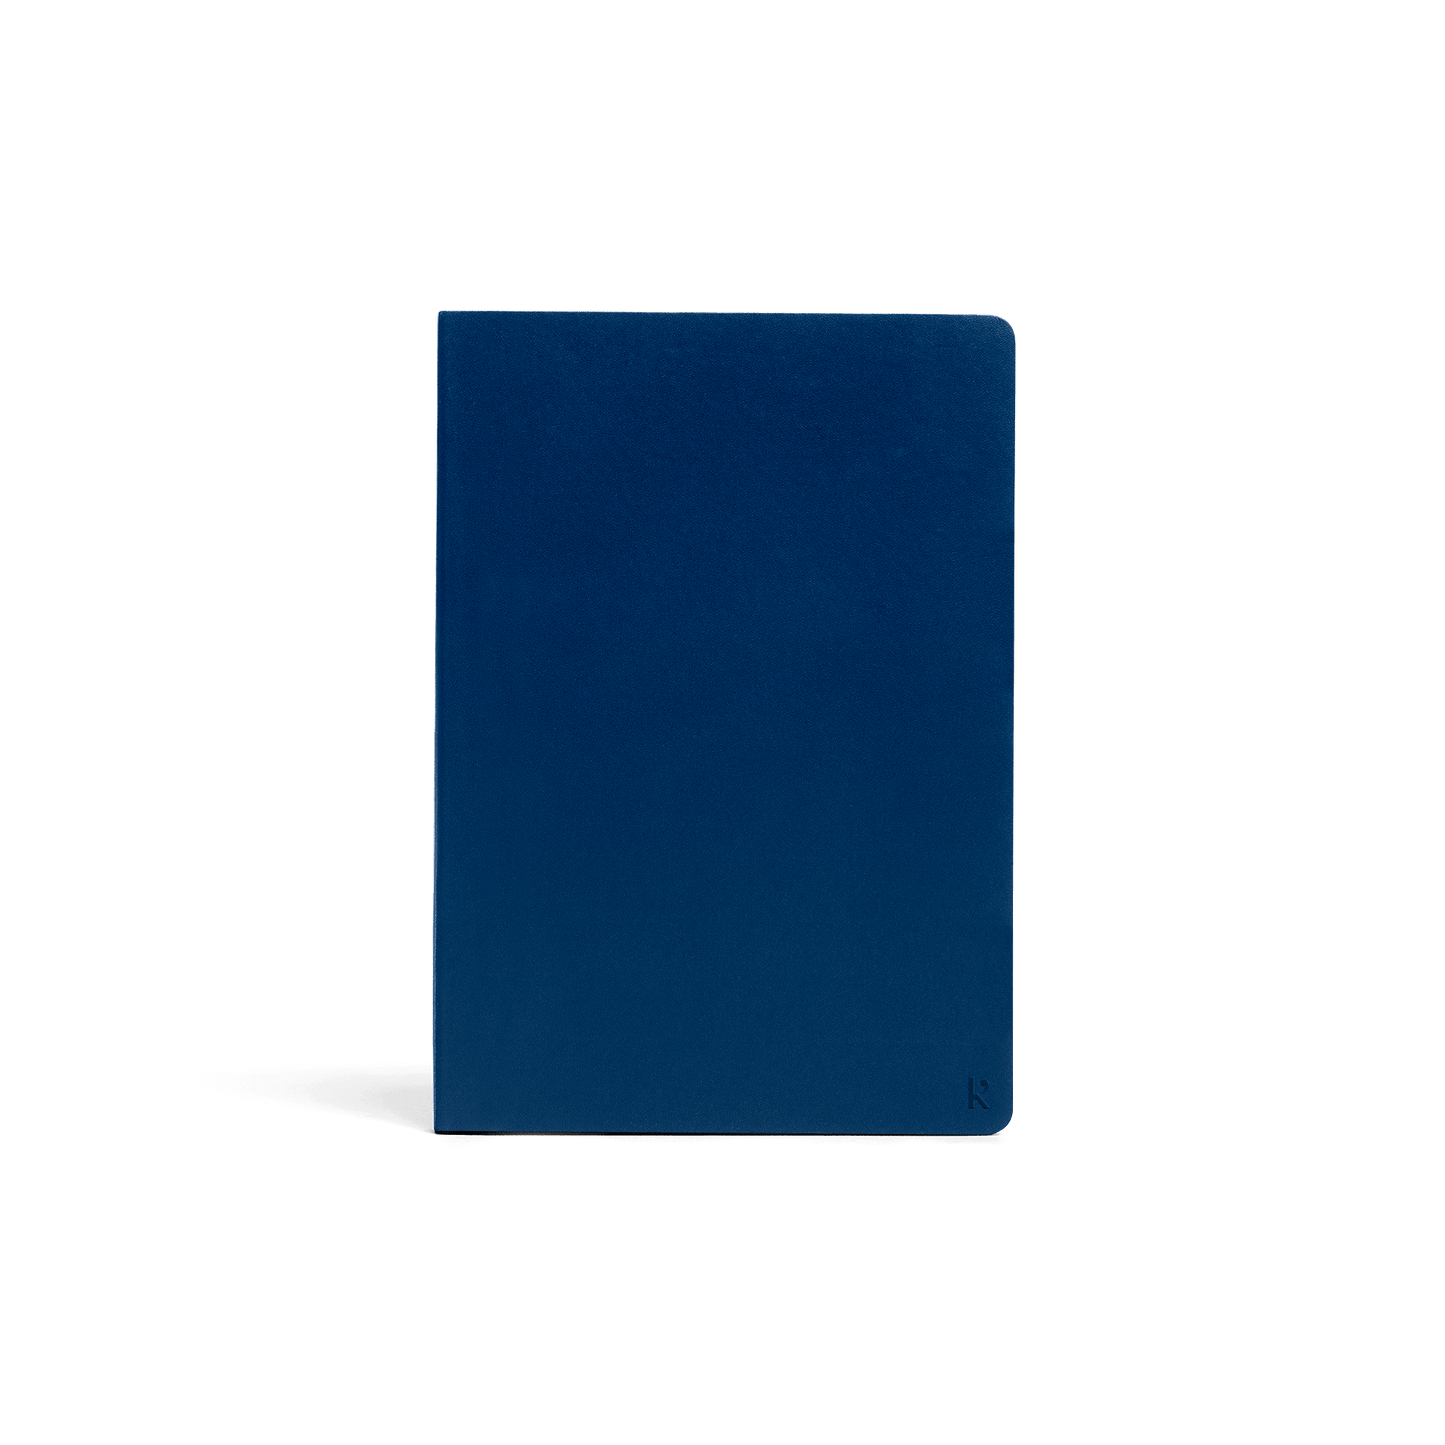 Stone Paper Softcover Notebook - White